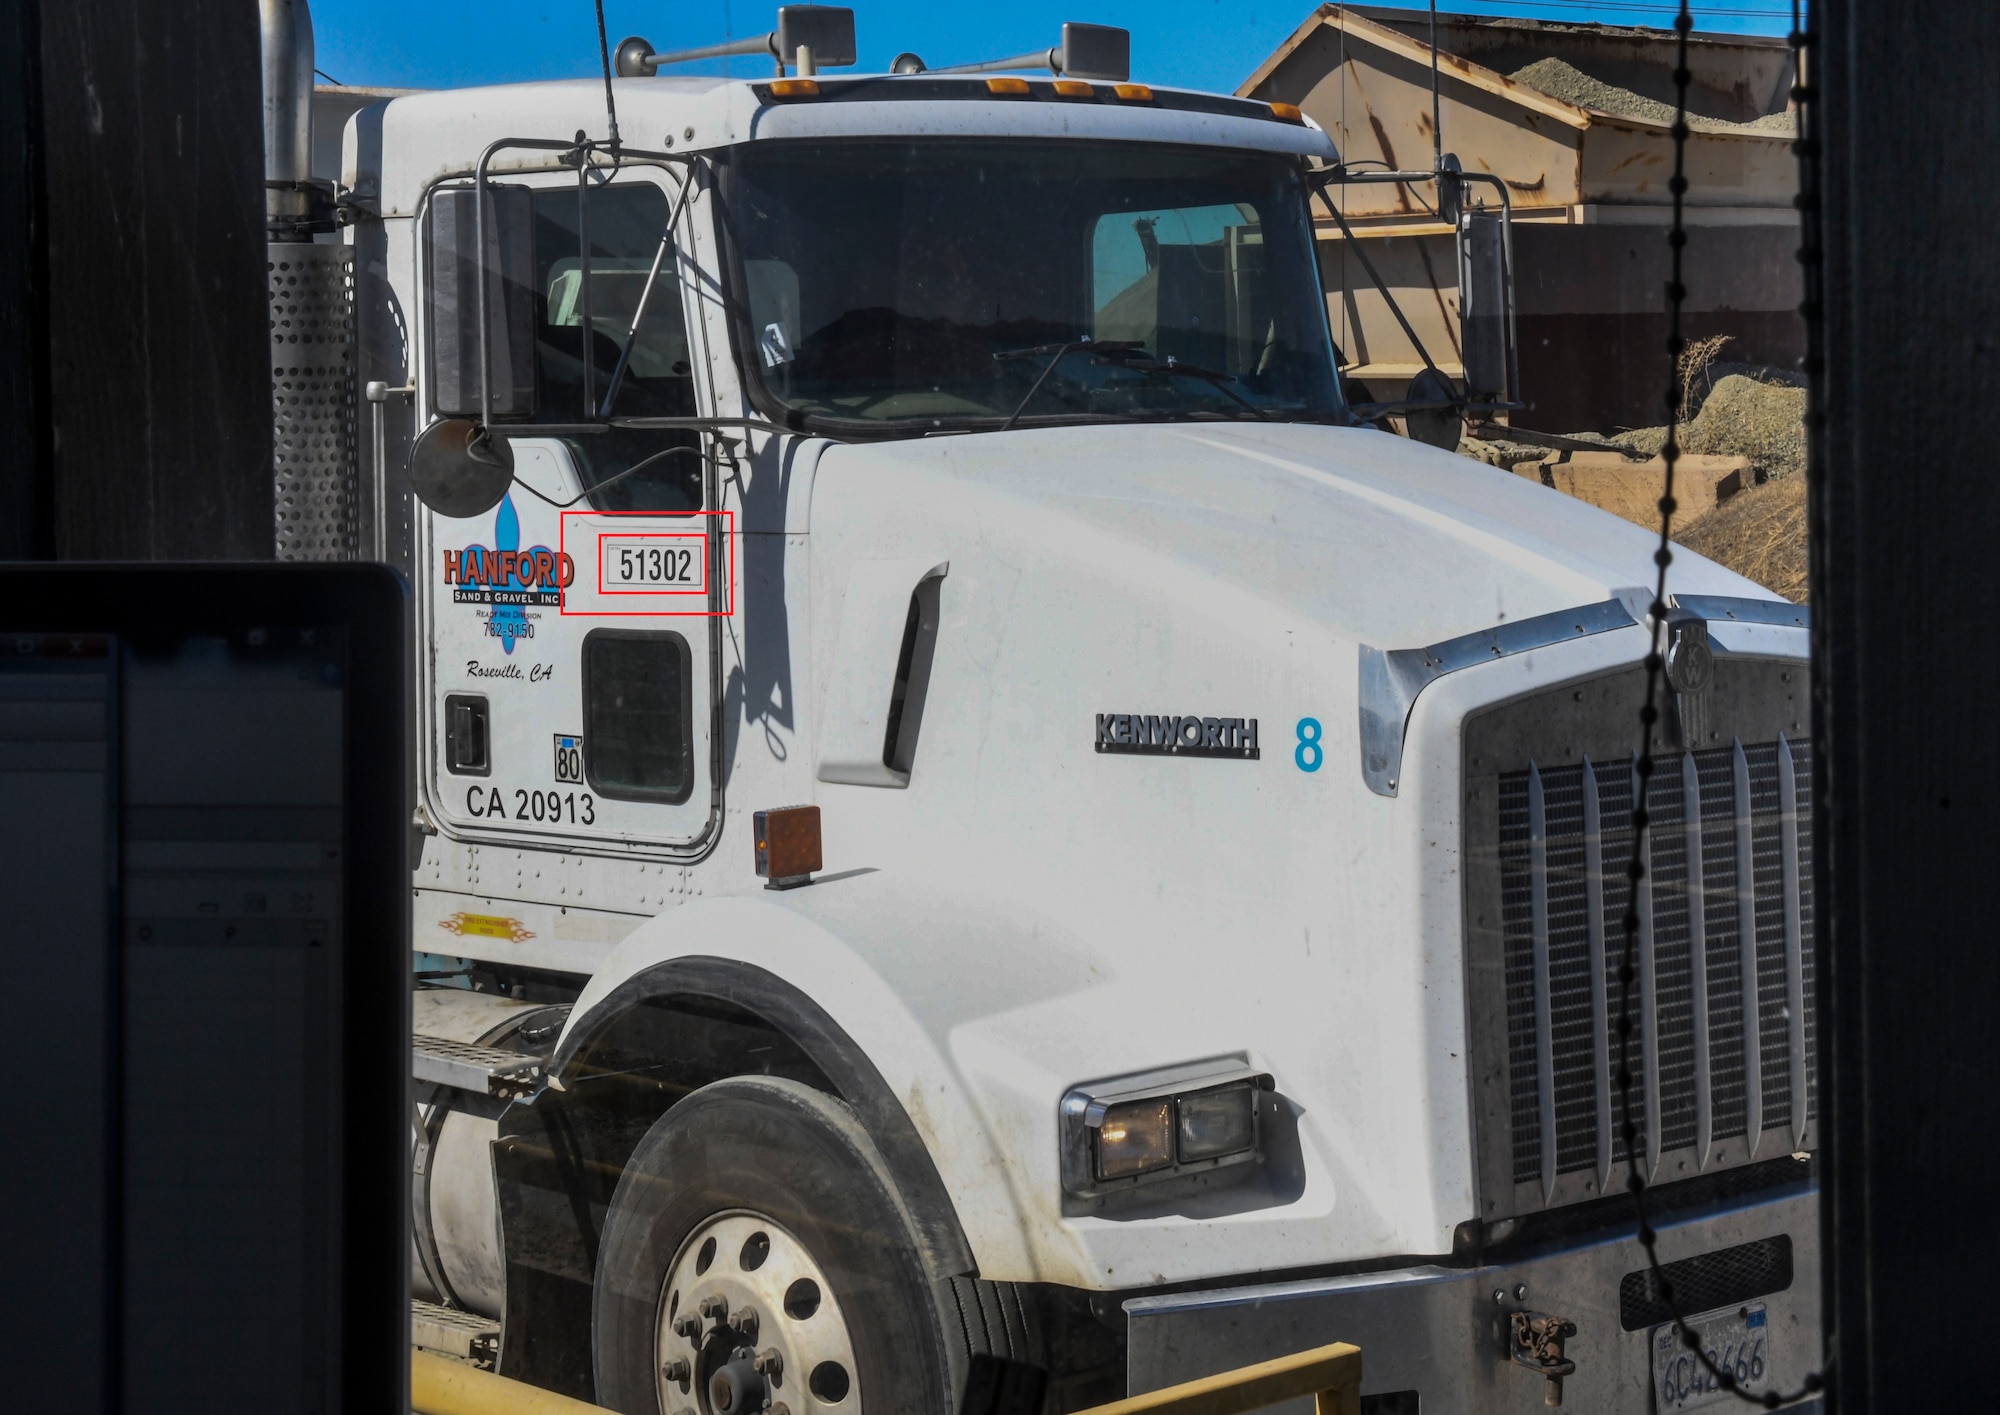 A contracted truck driver communicates with the weight master his information in Marysville, California, Oct. 10, 2019. Some indicators that can be used to identify a truck would be the five digit number (circled in red) that allows you to contact the company about any incident (U.S. Air Force Photo by Senior Airman Colville McFee)